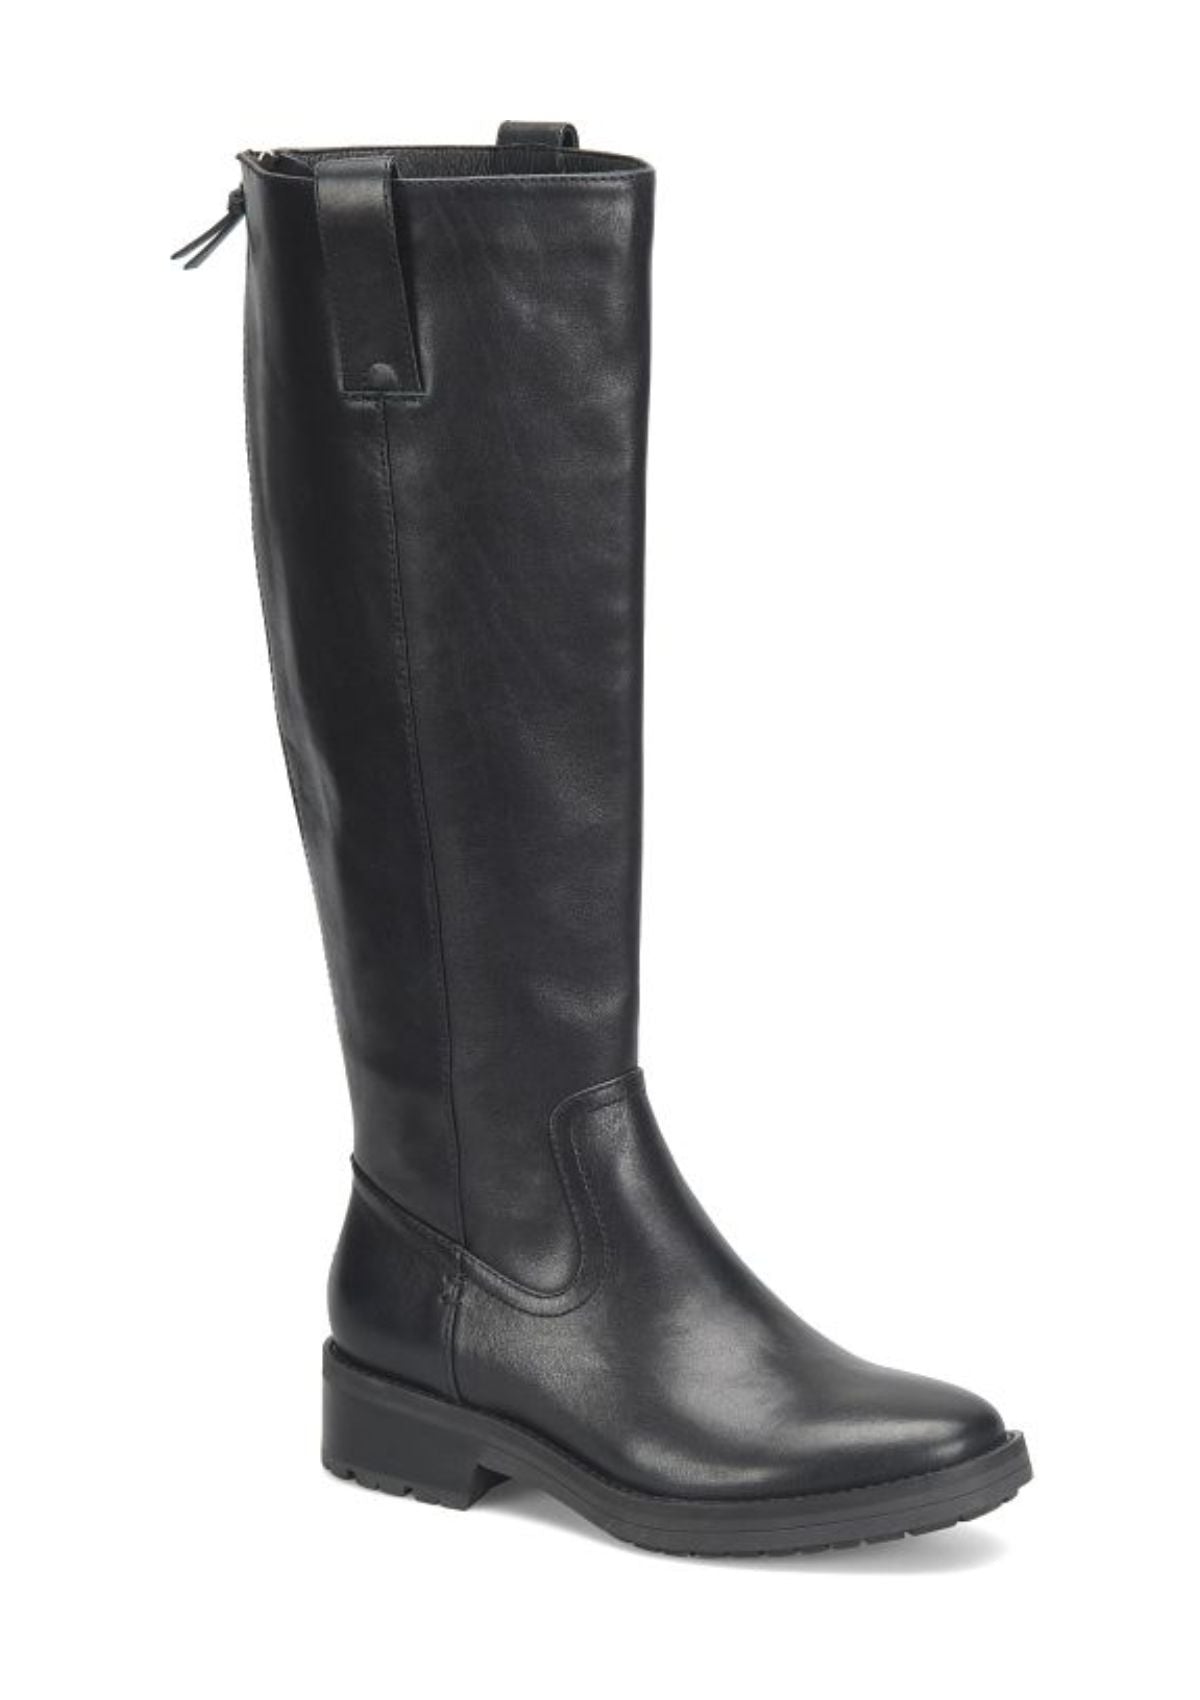 Samantha II Black Leather Upper, Tall Boot with Back Zipper -Sofft Shoe Co- Ruby Jane-